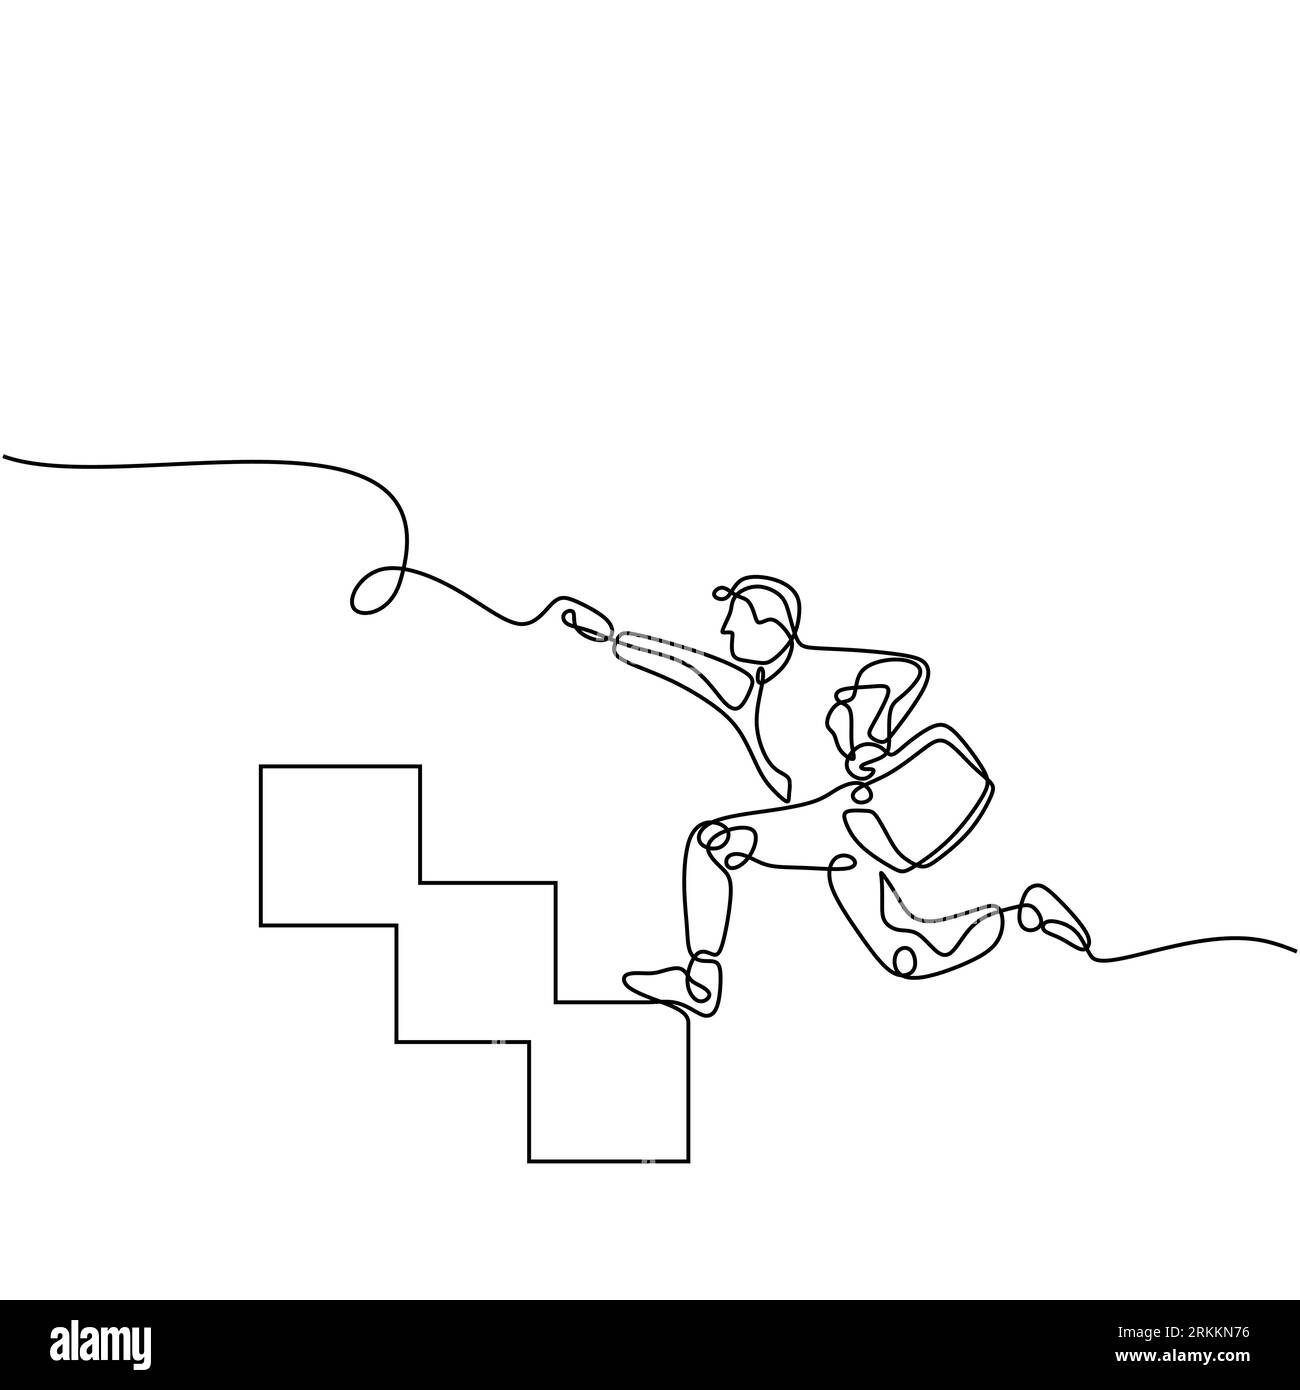 Stairway to success - continuous line drawing, Man running fast up stairs to reach his goals.Metaphor business success and boost personal career. Stock Vector